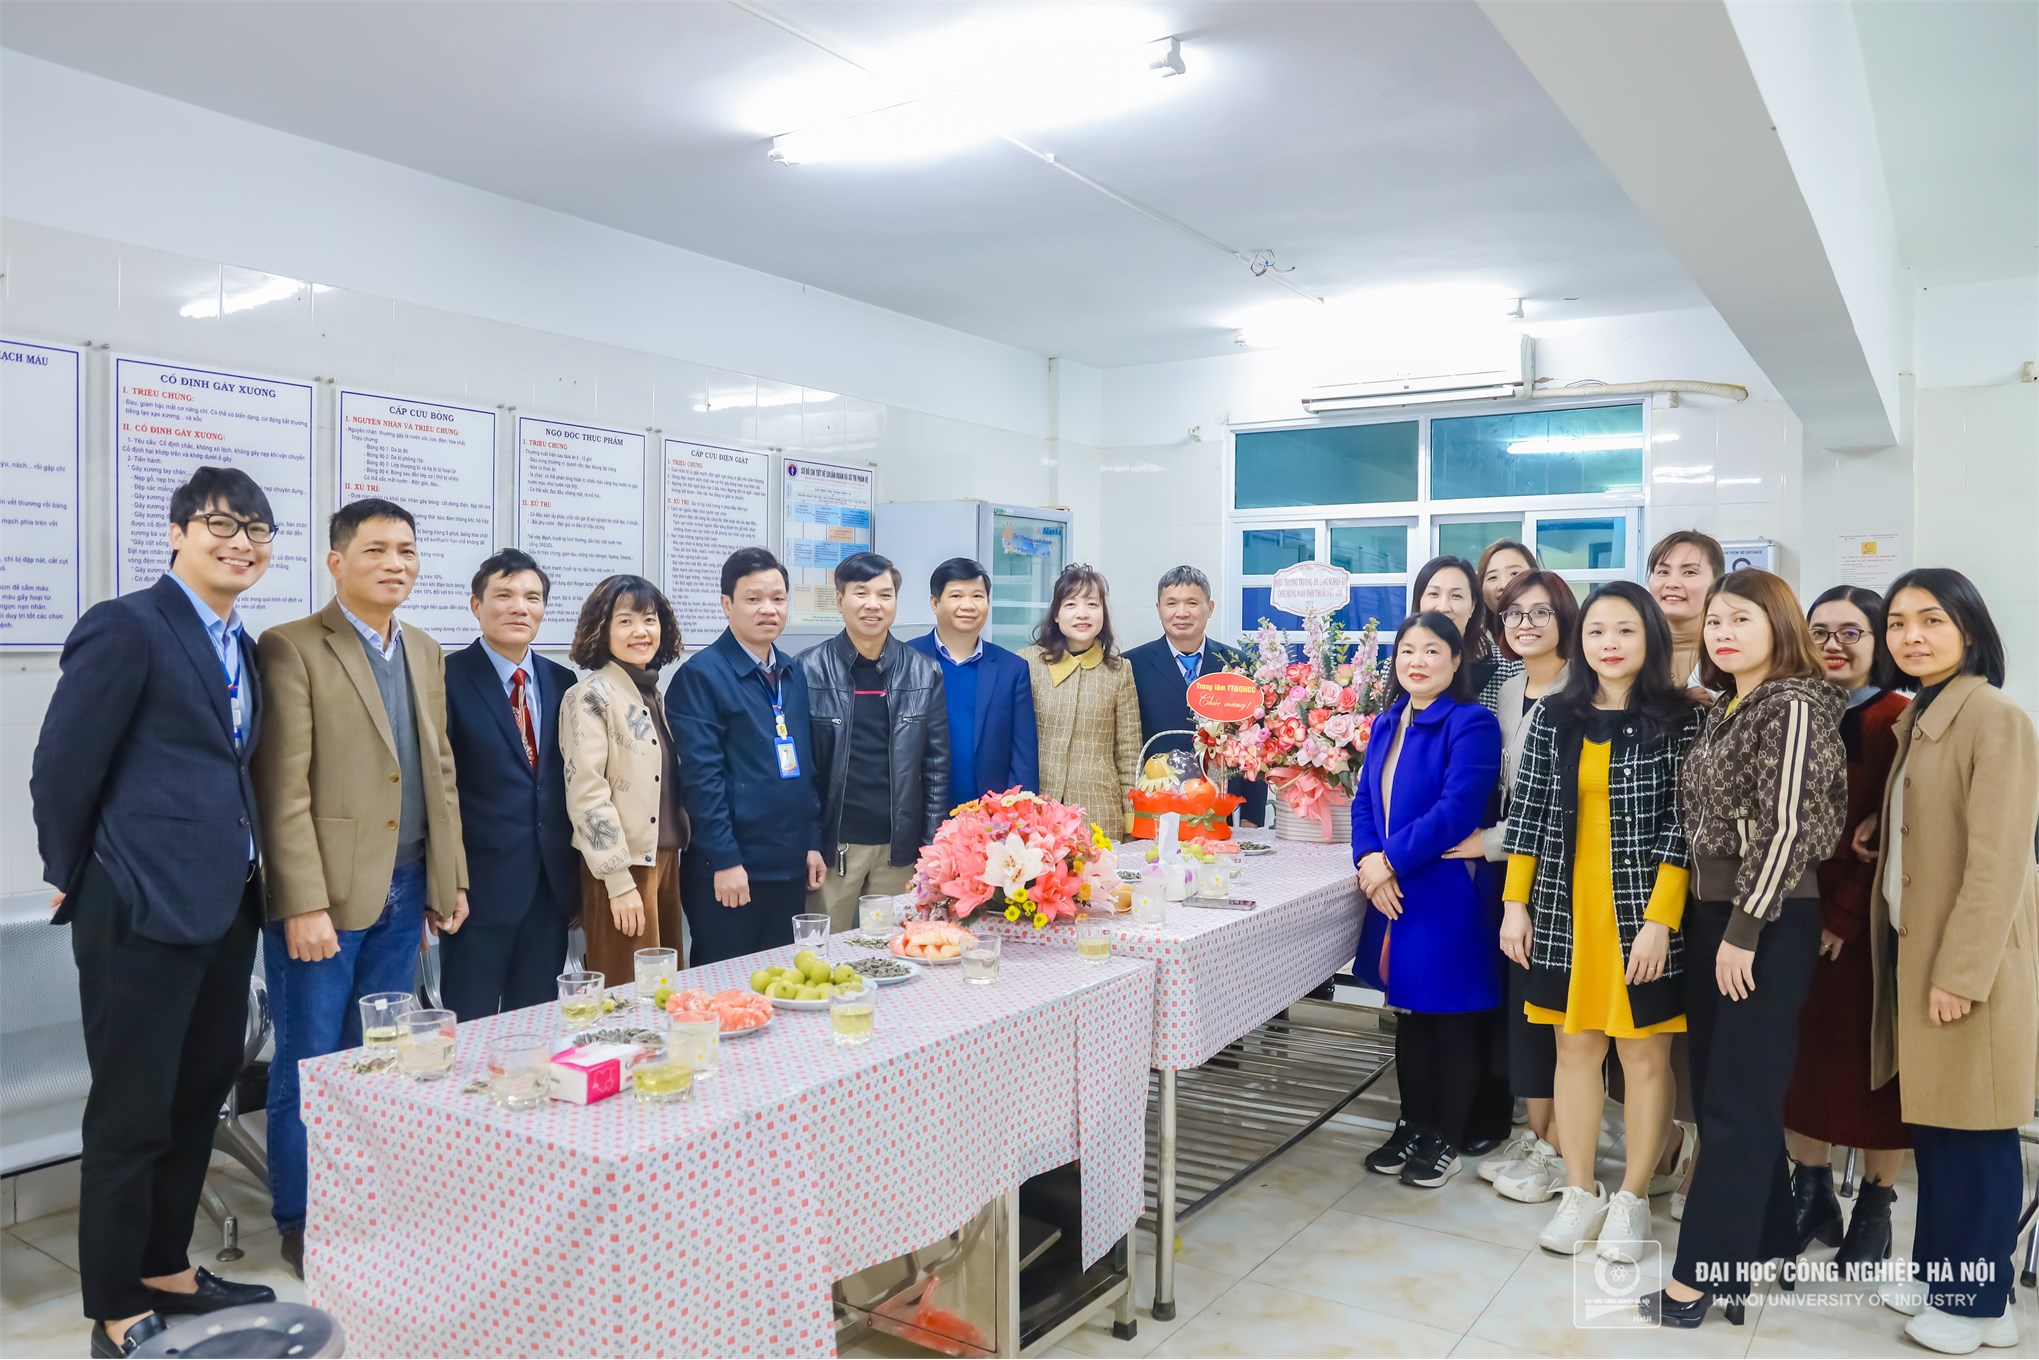 Vietnamese Doctor's Day: Honoring the Contributions of the University Medical Team